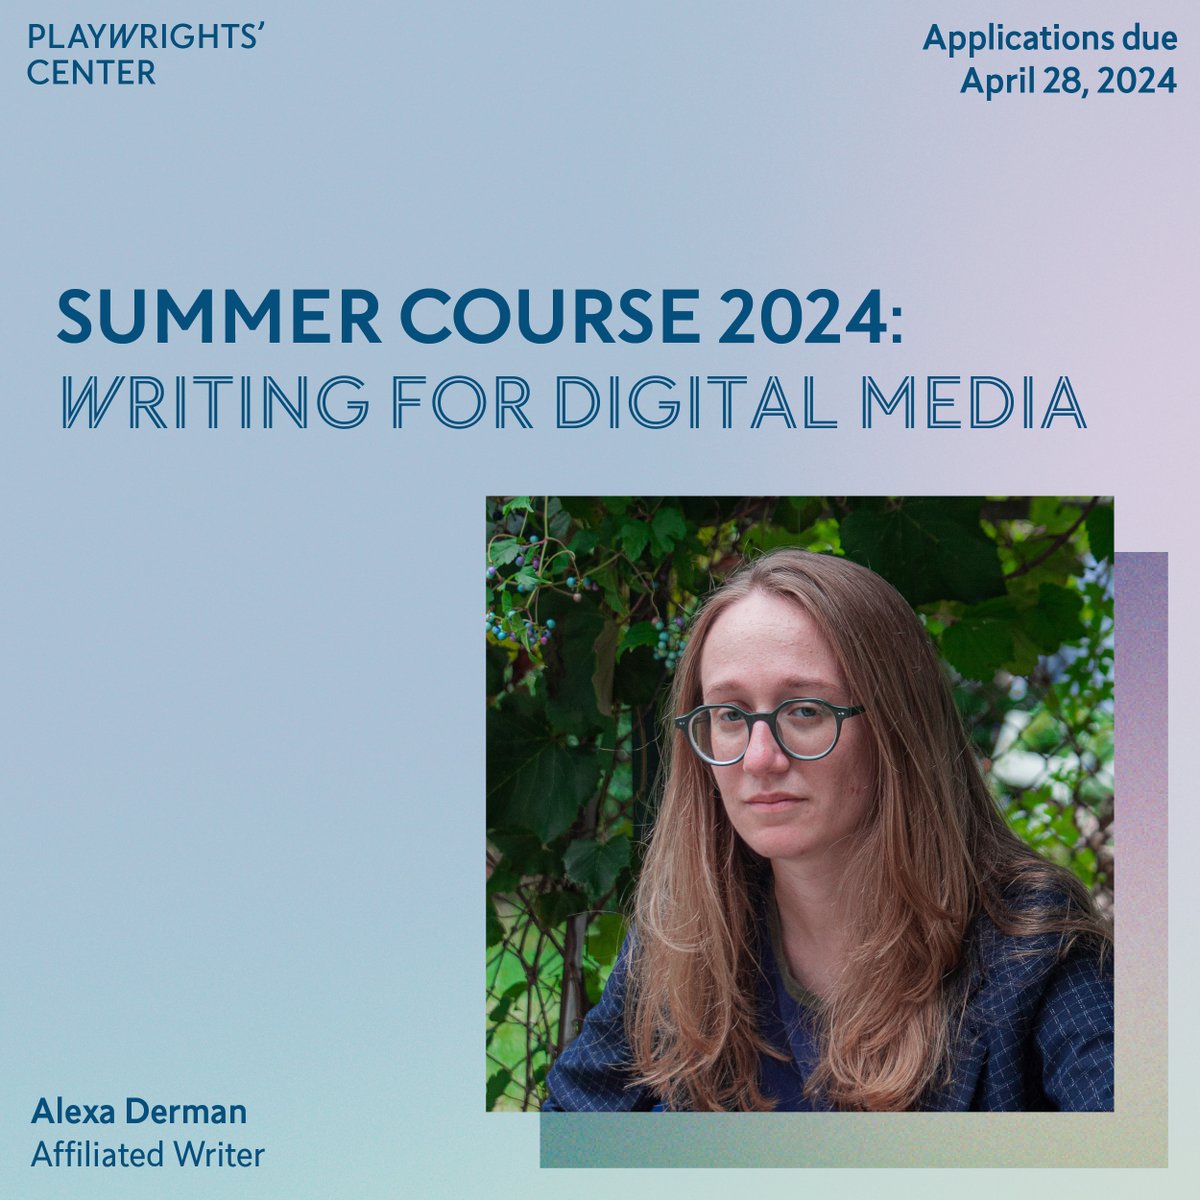 Registration for our exciting new course: Writing for Digital Media with Alexa Derman. This course is offered completely online and will run for 12 weeks over Summer 2024. You can take the class if you're not currently enrolled in University! Apply now! pwcenter.org/university-cou…